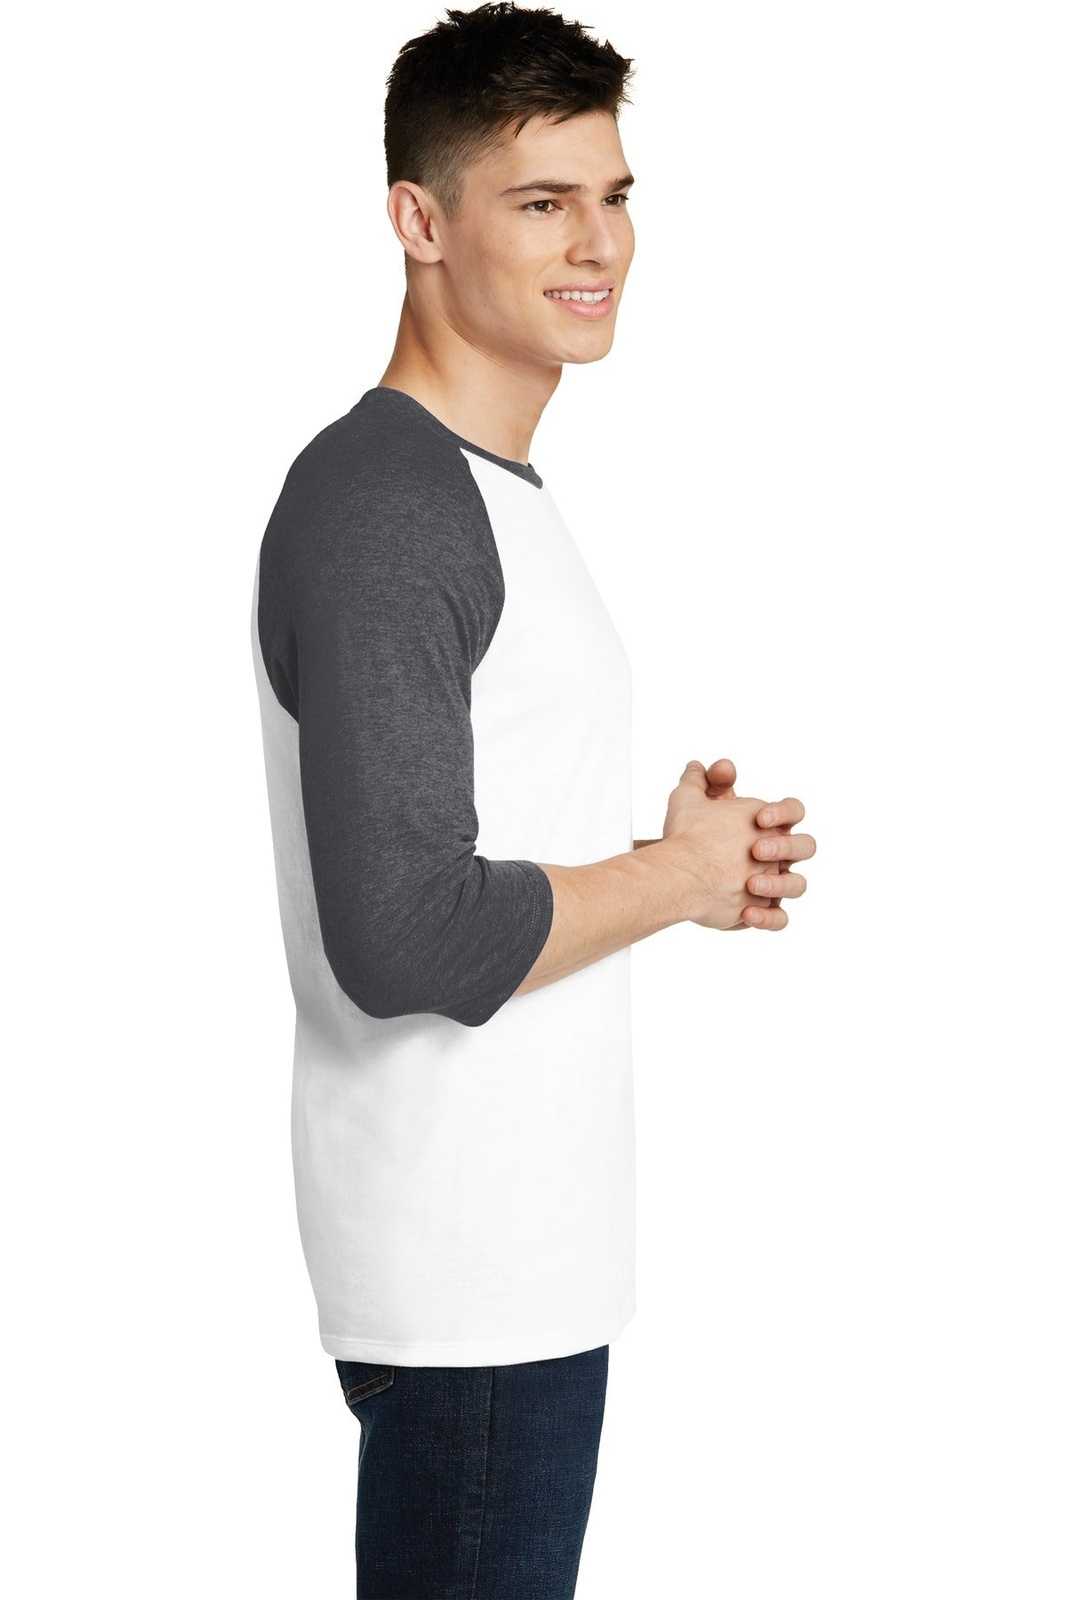 District DT6210 Very Important Tee 3/4-Sleeve Raglan - Heathered Charcoal White - HIT a Double - 3